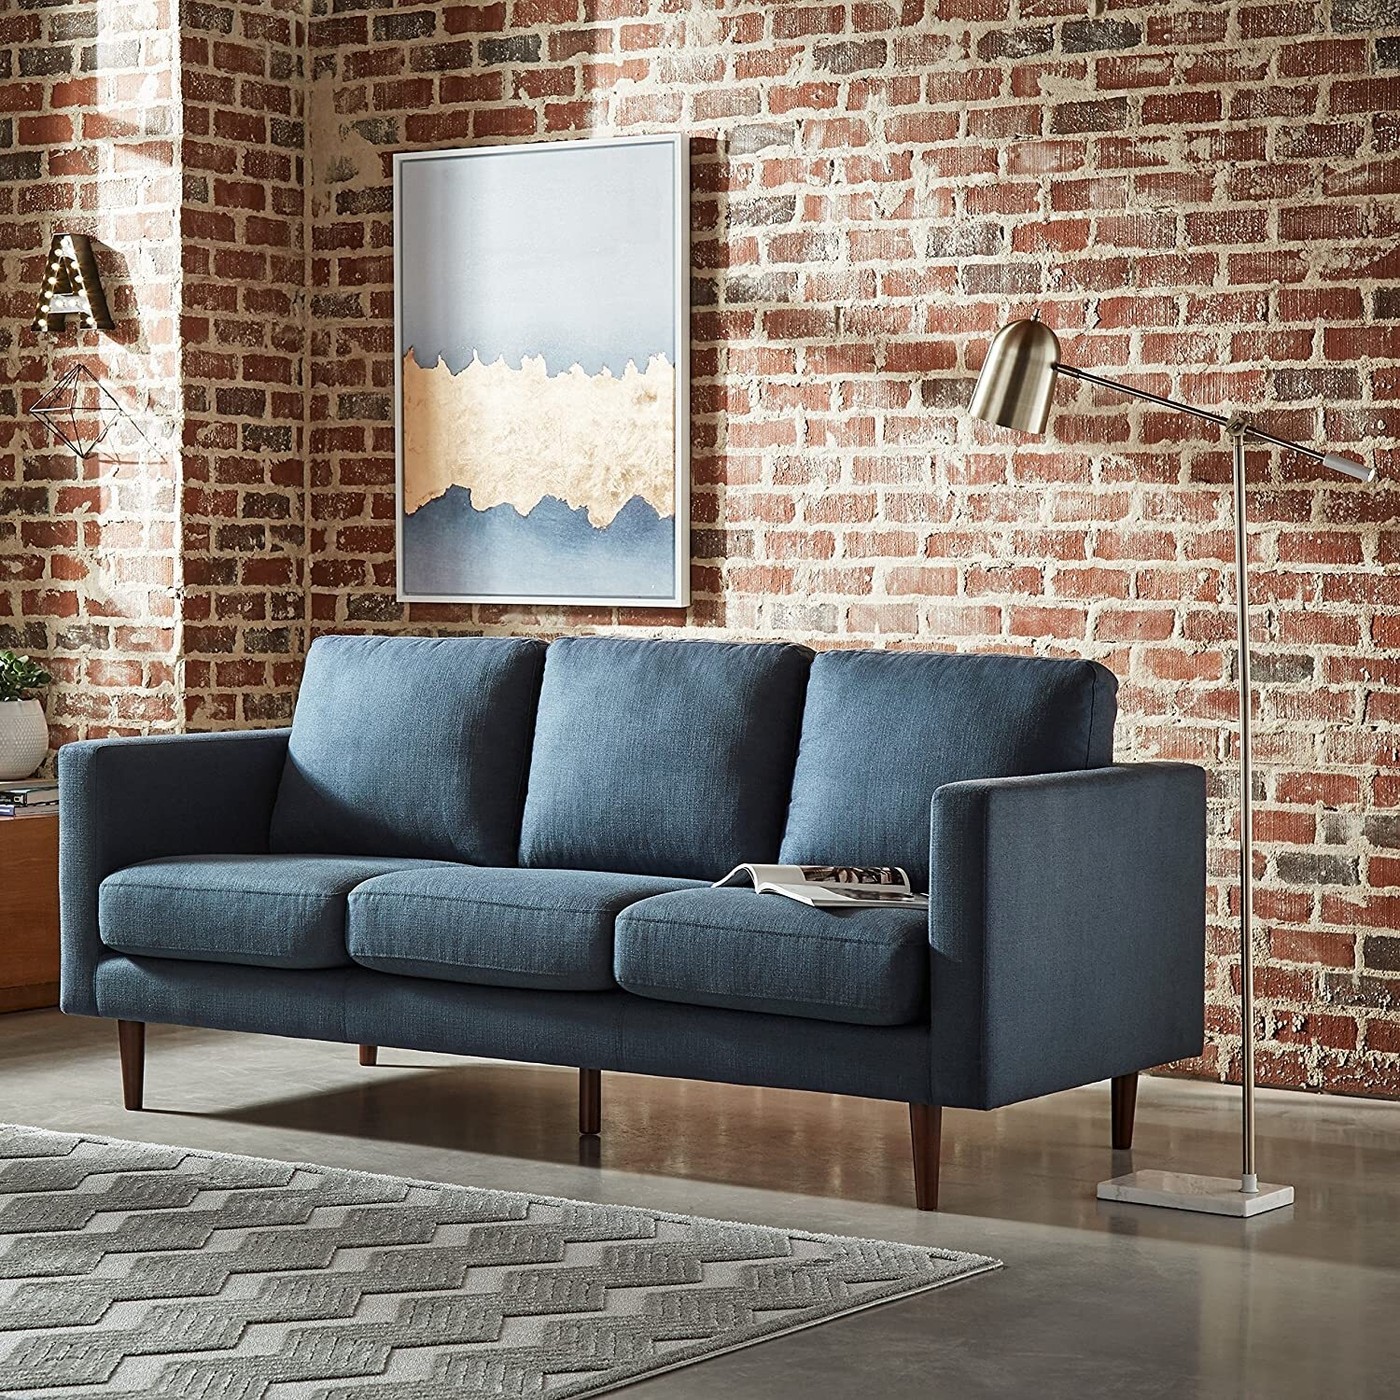 Modern Sofas | Leather & Upholstered Sofa Sale | Zin Home